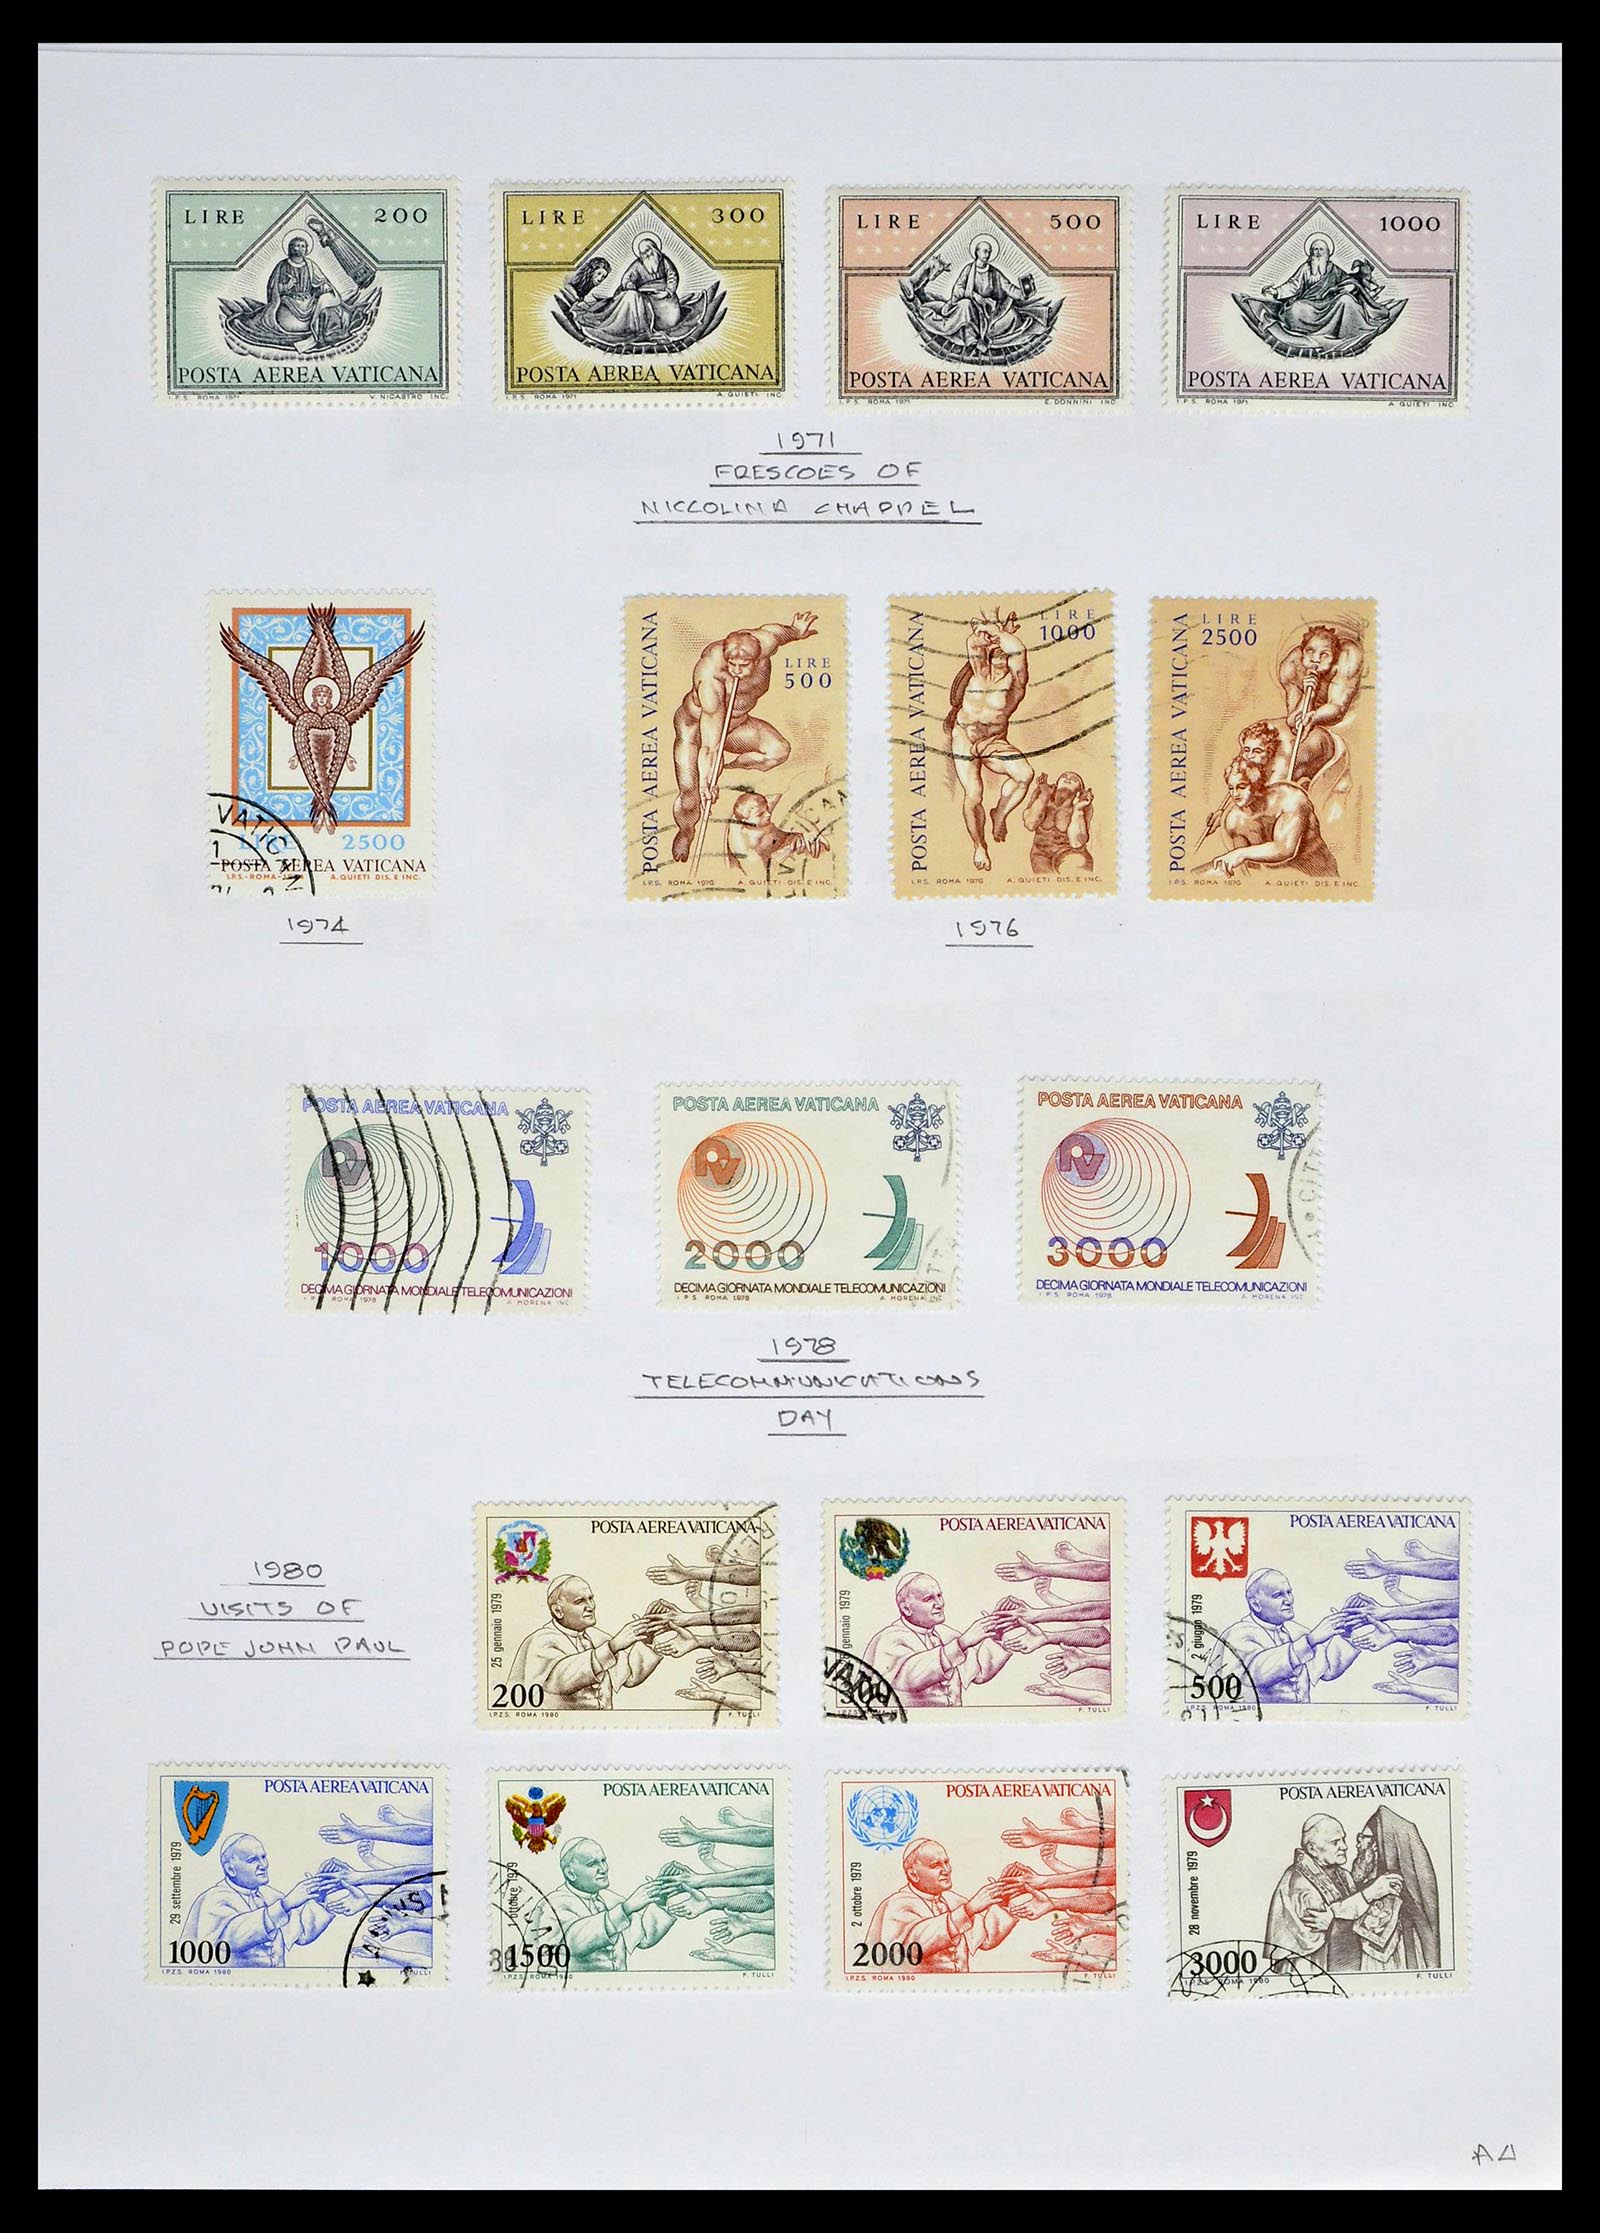 39099 0095 - Stamp collection 39099 Vatican 1852-2008.